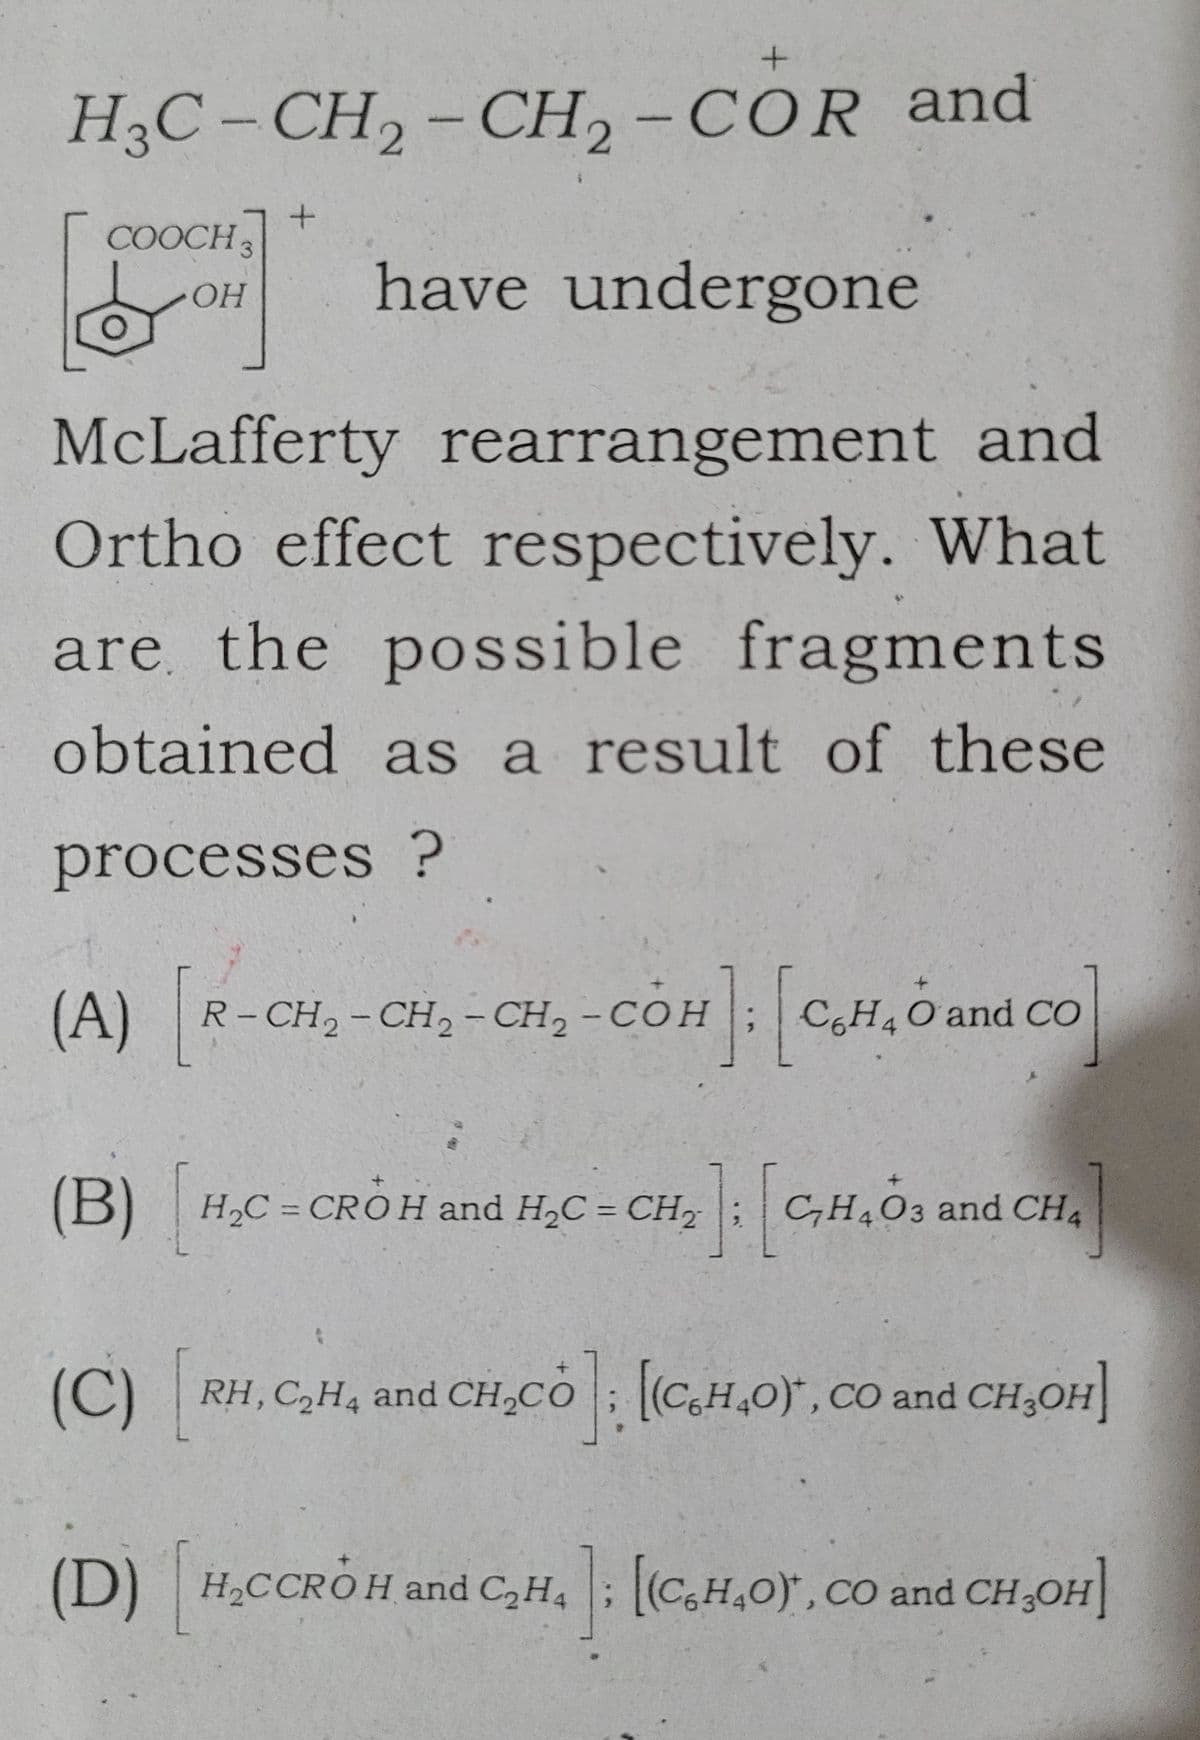 +
H3C- CH₂ - CH2 - COR and
have undergone
McLafferty rearrangement and
Ortho effect respectively. What
are the possible fragments
obtained as a result of these
processes ?
COOCH3
OH
+
(A) [R-CH₂-C
(A) R-CH₂-CH₂ - CH₂ - COH
@E
OH]: [c
C6H4 O and CO
(B) H₂C=CROH and H₂C = CH₂
[2] : [ C₂H4O3 and CH4
(C)
(D) H₂CCROH and C₂H4; [(C6H4O), CO and CH₂OH]
RH, C₂H4 and CH₂CO; [(C₂H4O), CO and CH₂OH]